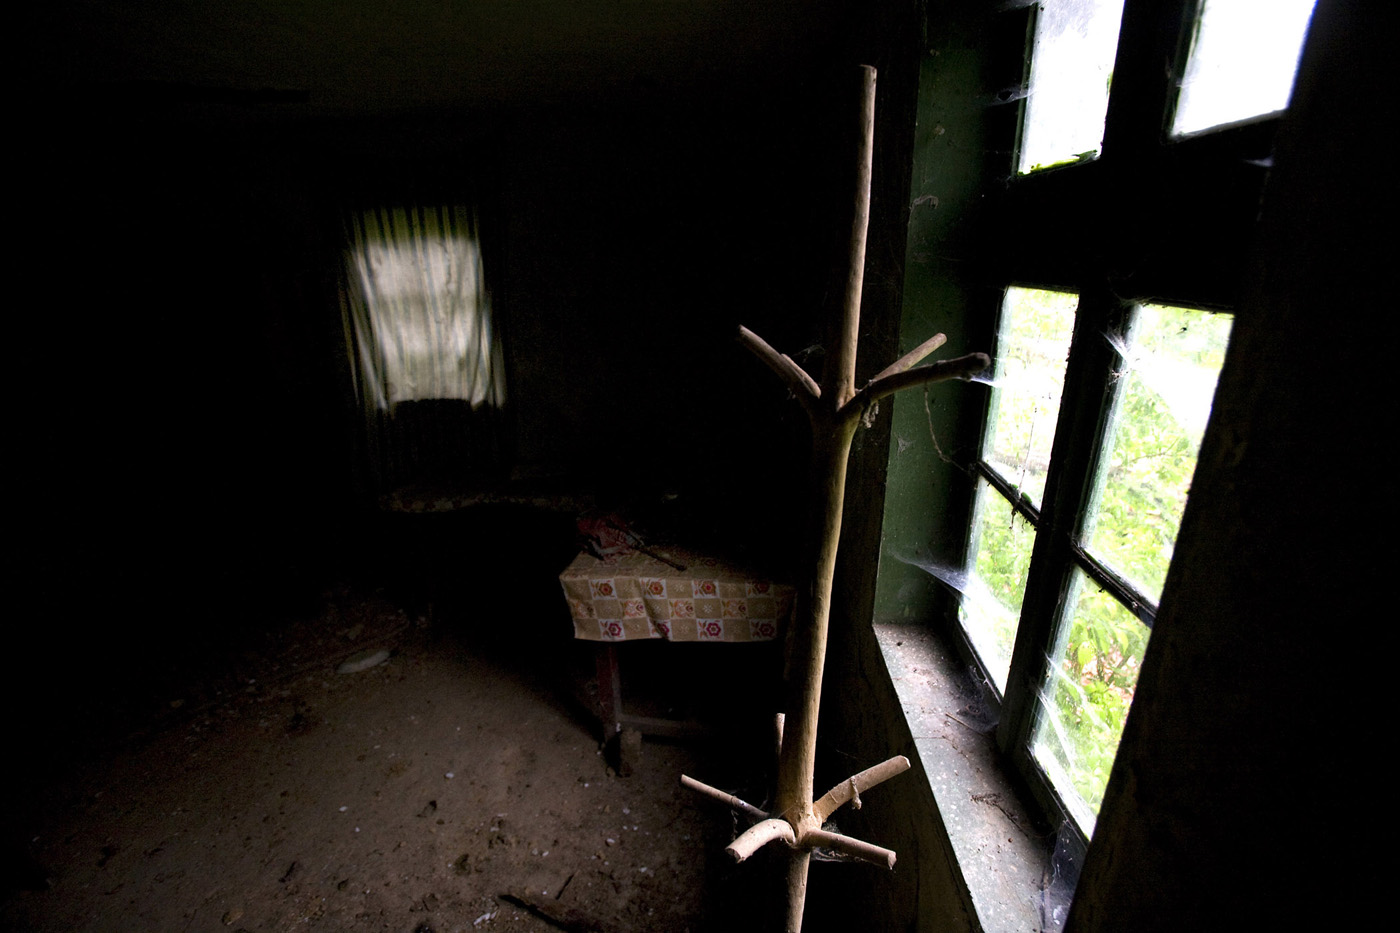 Some furnitere is seen in one of the abanded houses in a desserted village on Stara planina mountain.